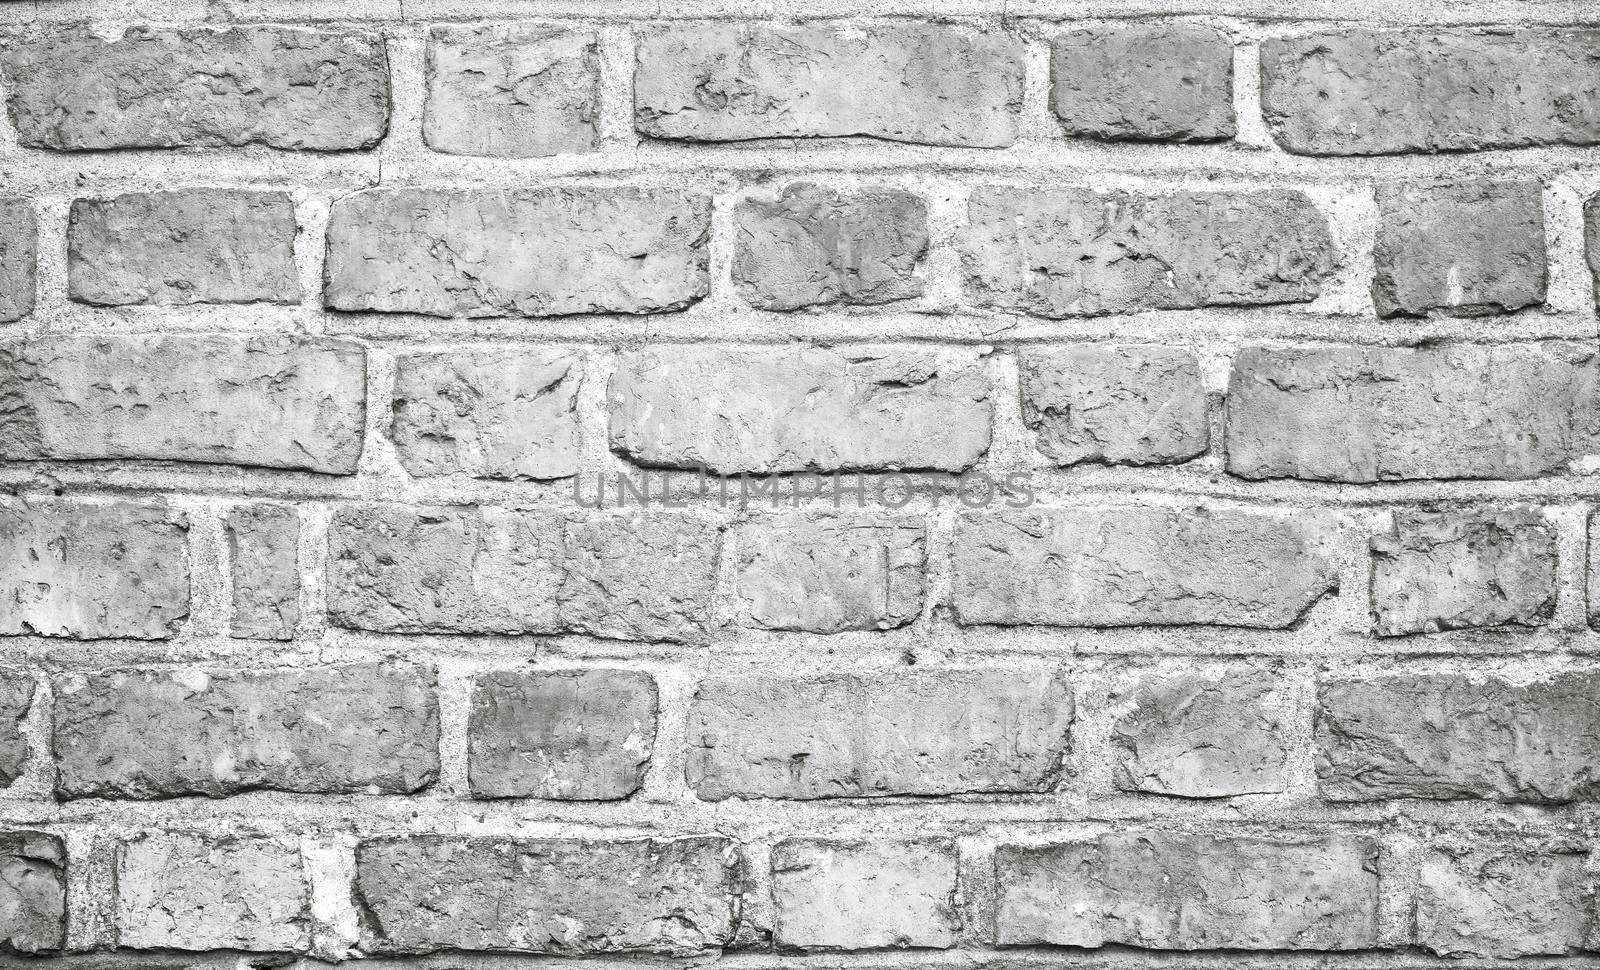 Old brick wall. Horizontal wide brick wall background. Vintage house facade